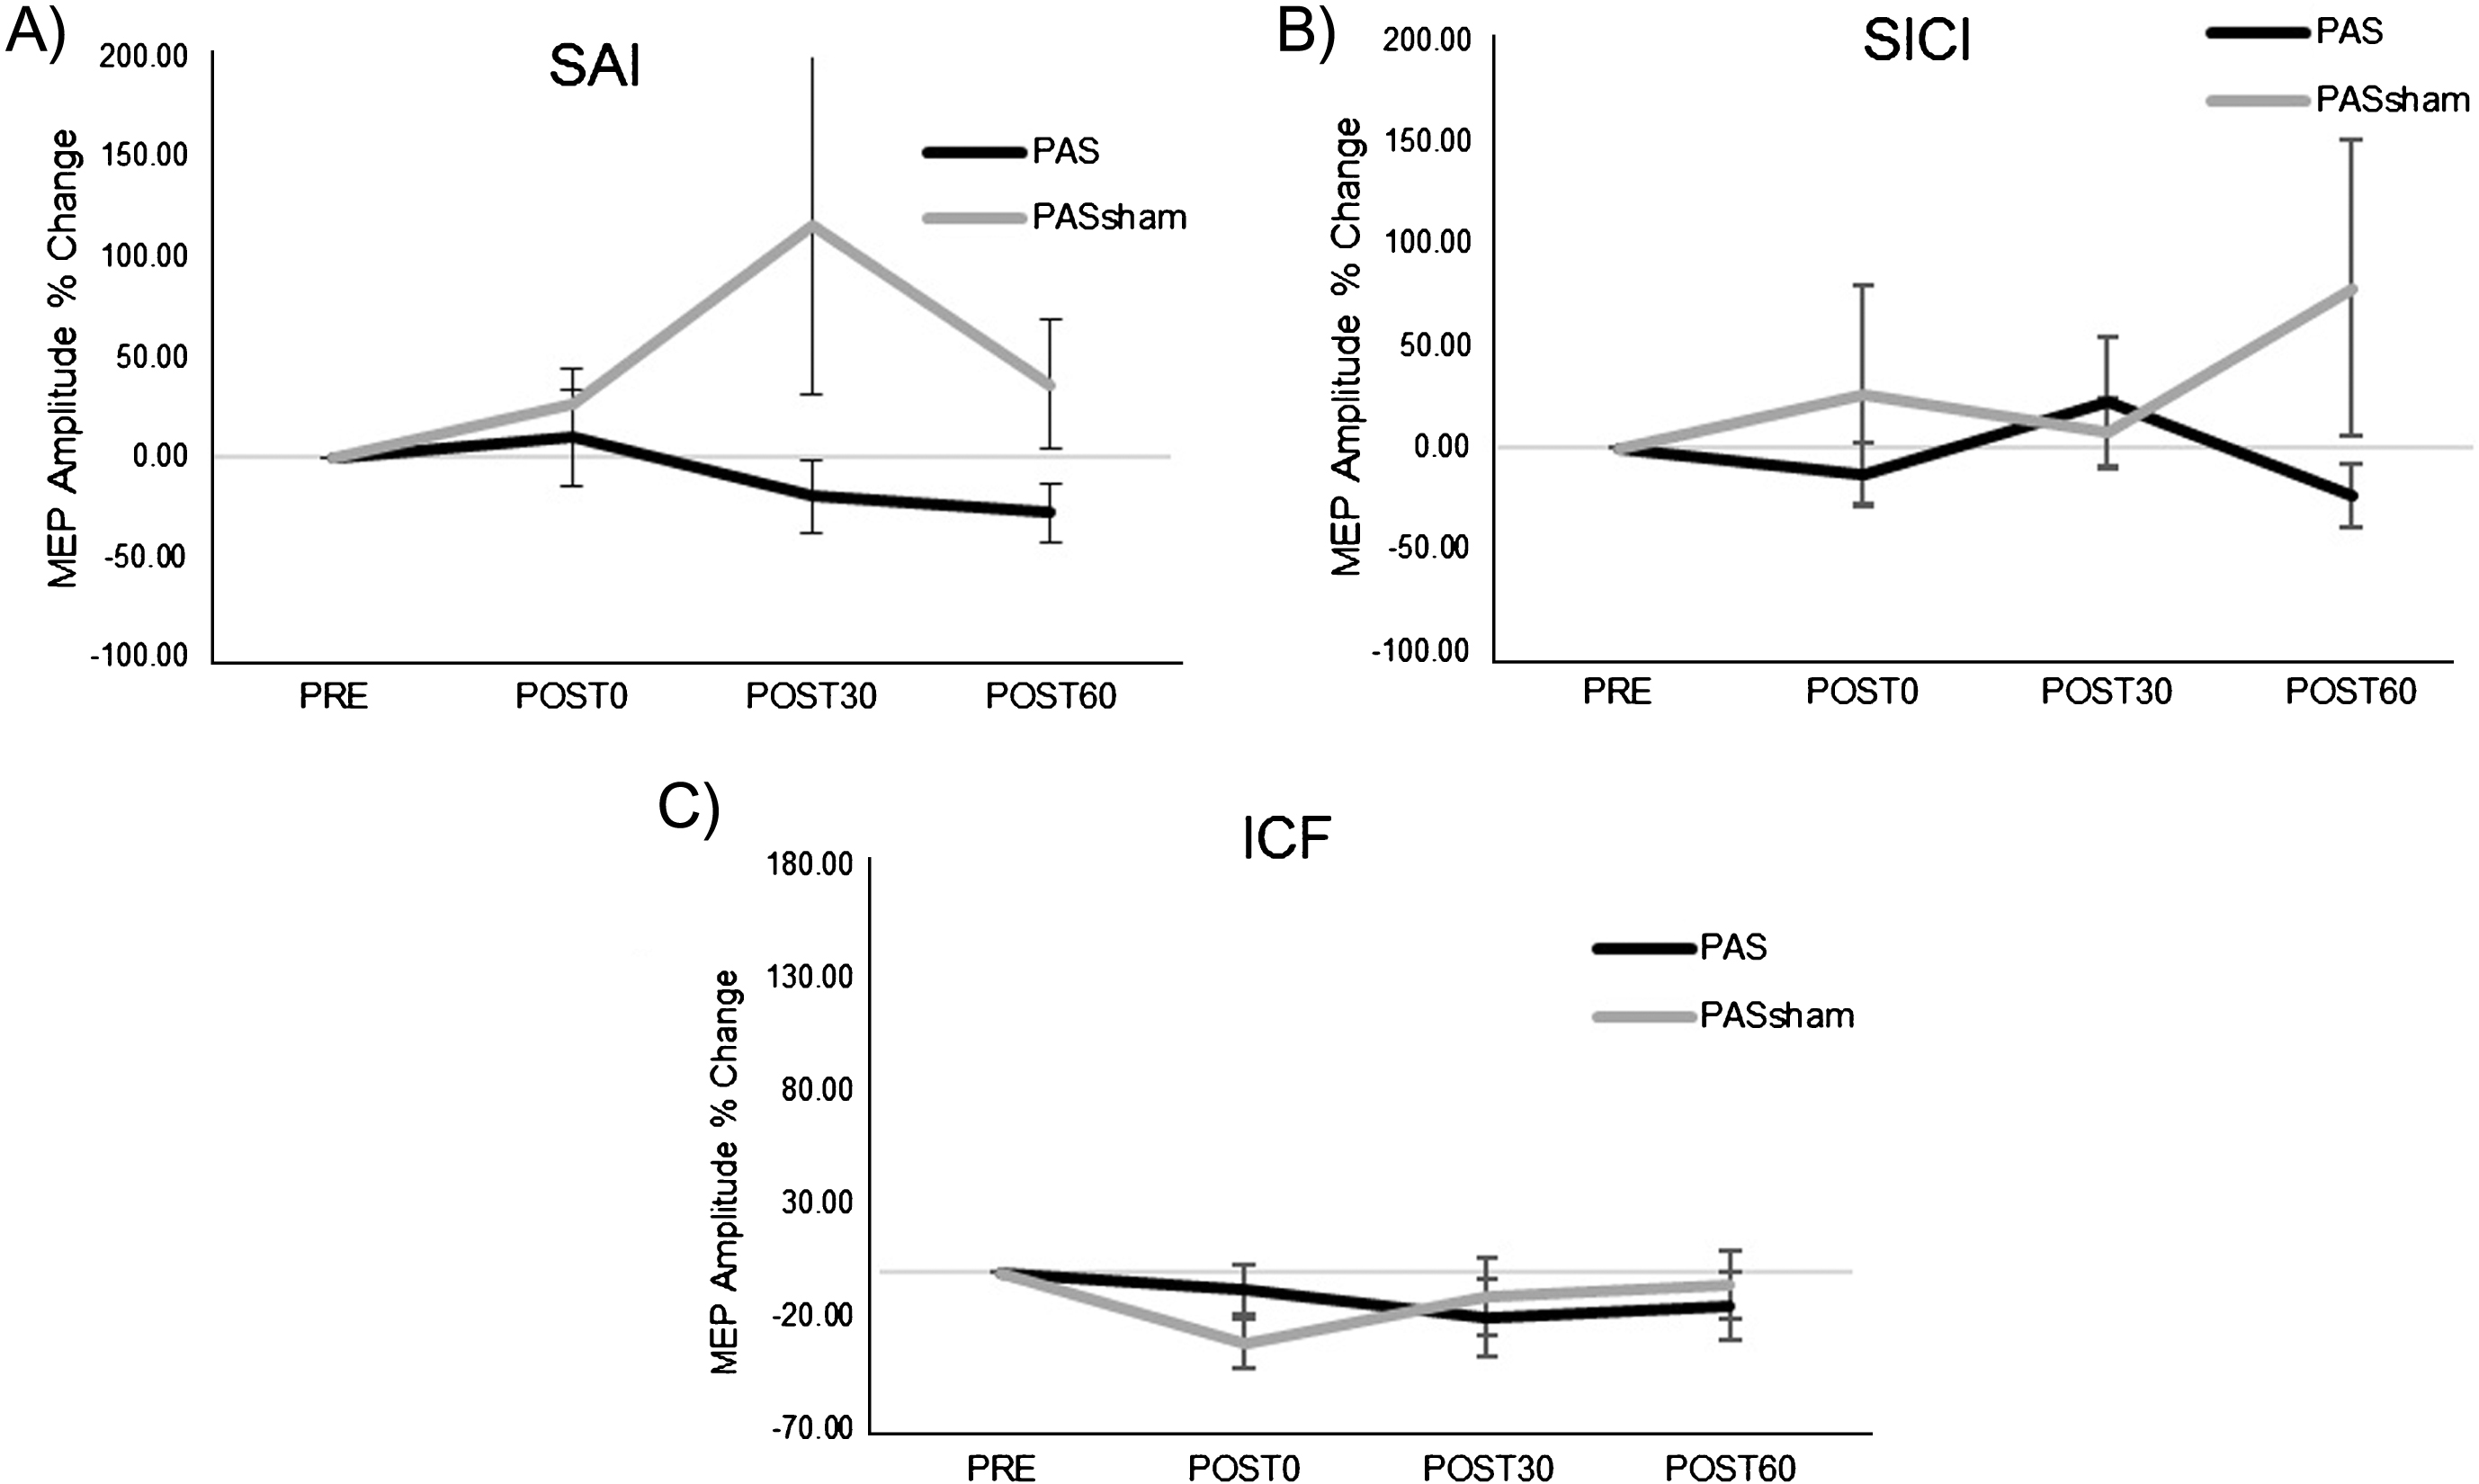 Group normalized MEP amplitude (mean±SE) during the PAS and PASSHAM conditions for A) SAI, B) SICI, and C) ICF TMS tests. No significant interaction or main effects of condition or time were observed. (SAI: short afferent inhibition, SICI: short interval intracortical inhibition, ICF: intracortical facilitation).